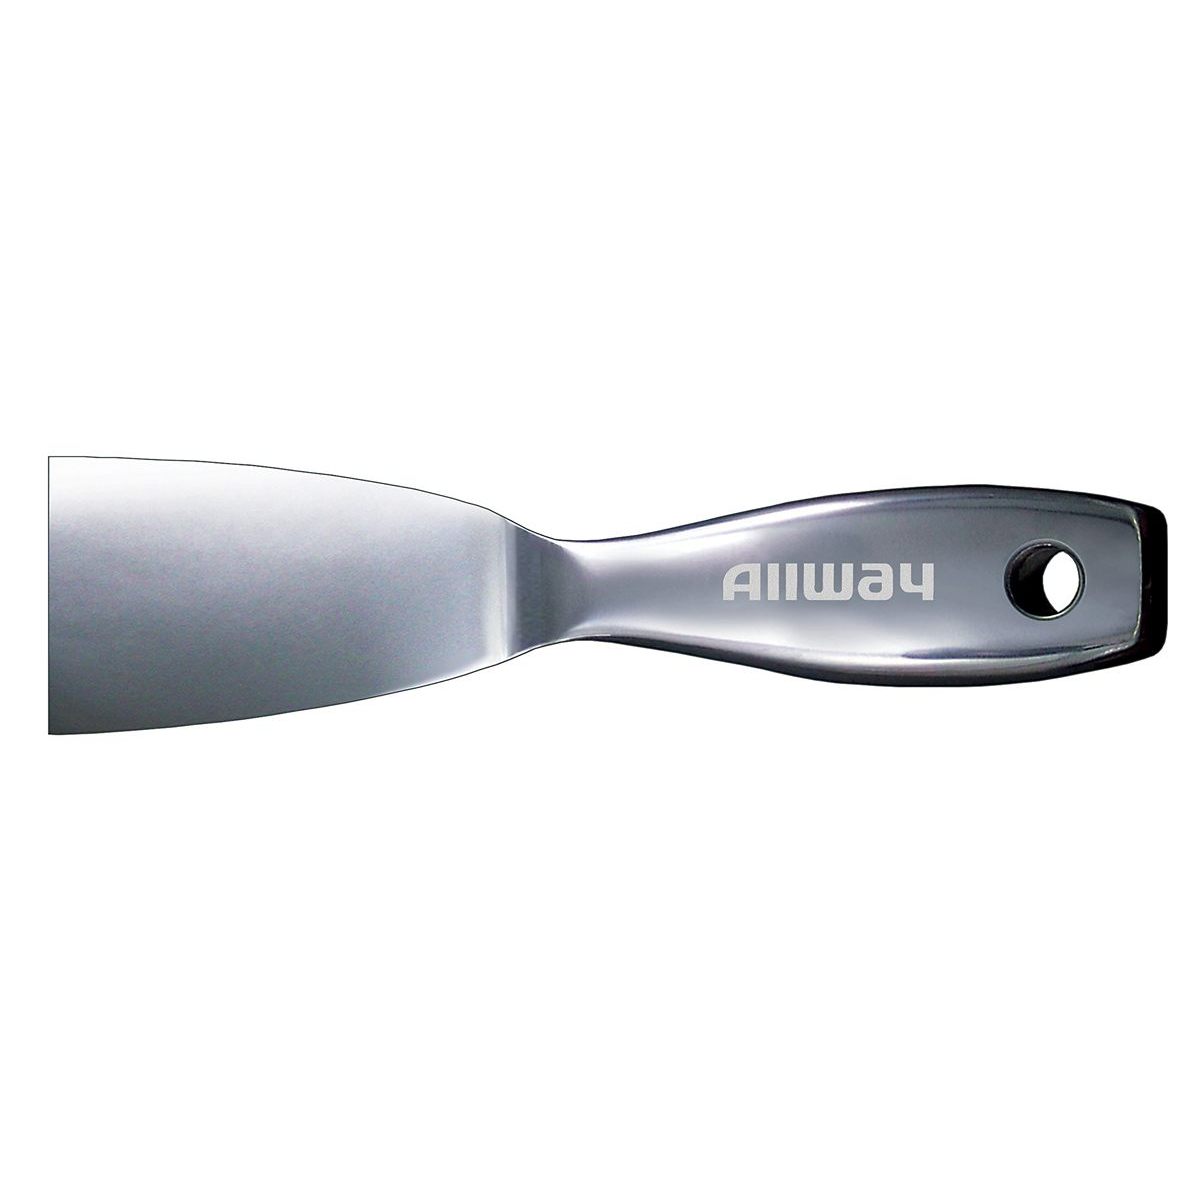 UX2F) 2” One-Piece Stainless Steel Pro Putty Knife, Labelled » ALLWAY® The  Tools You Ask For By Name